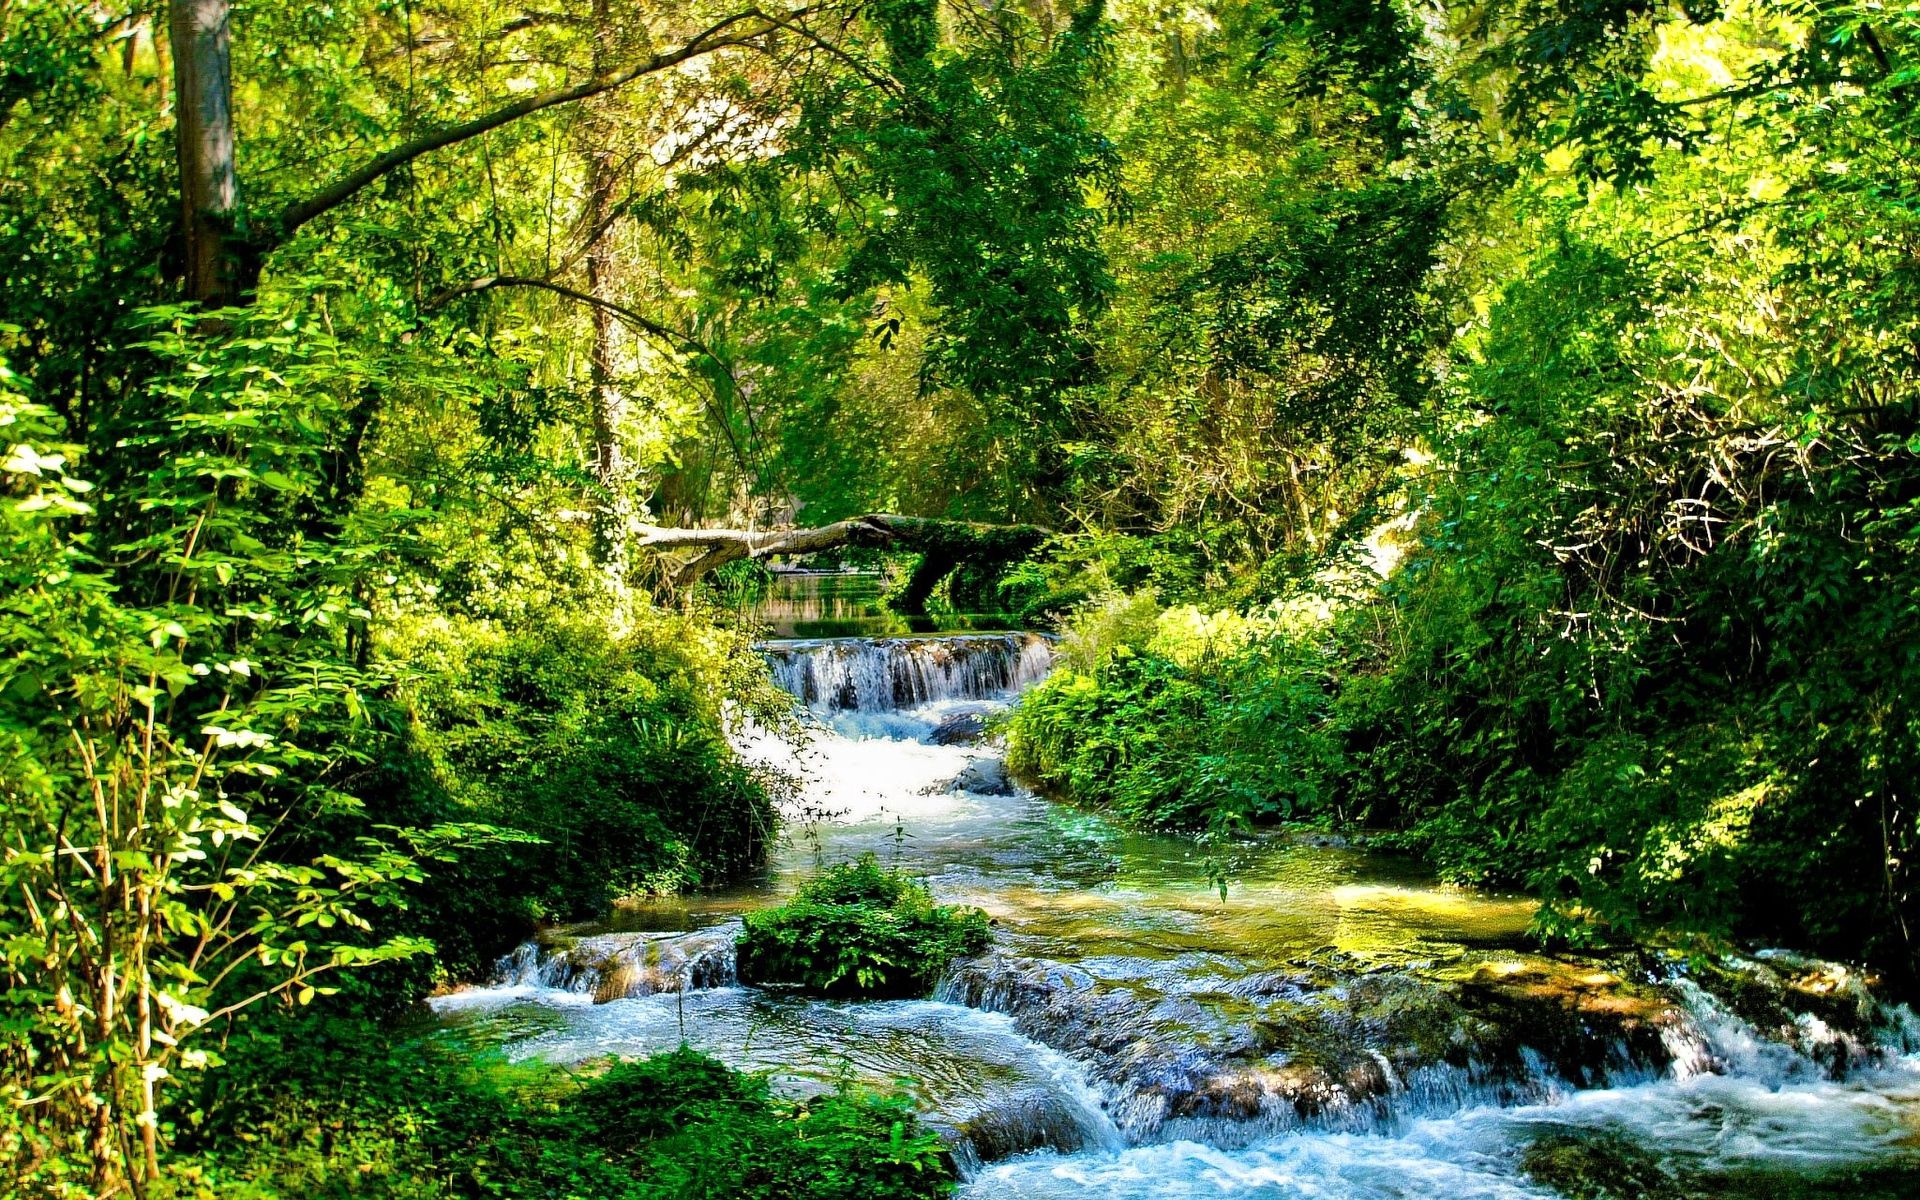 rivers, forest, streams, sunny, cascades, shine, brook, nature, creek, trees, branches, light, flows, green